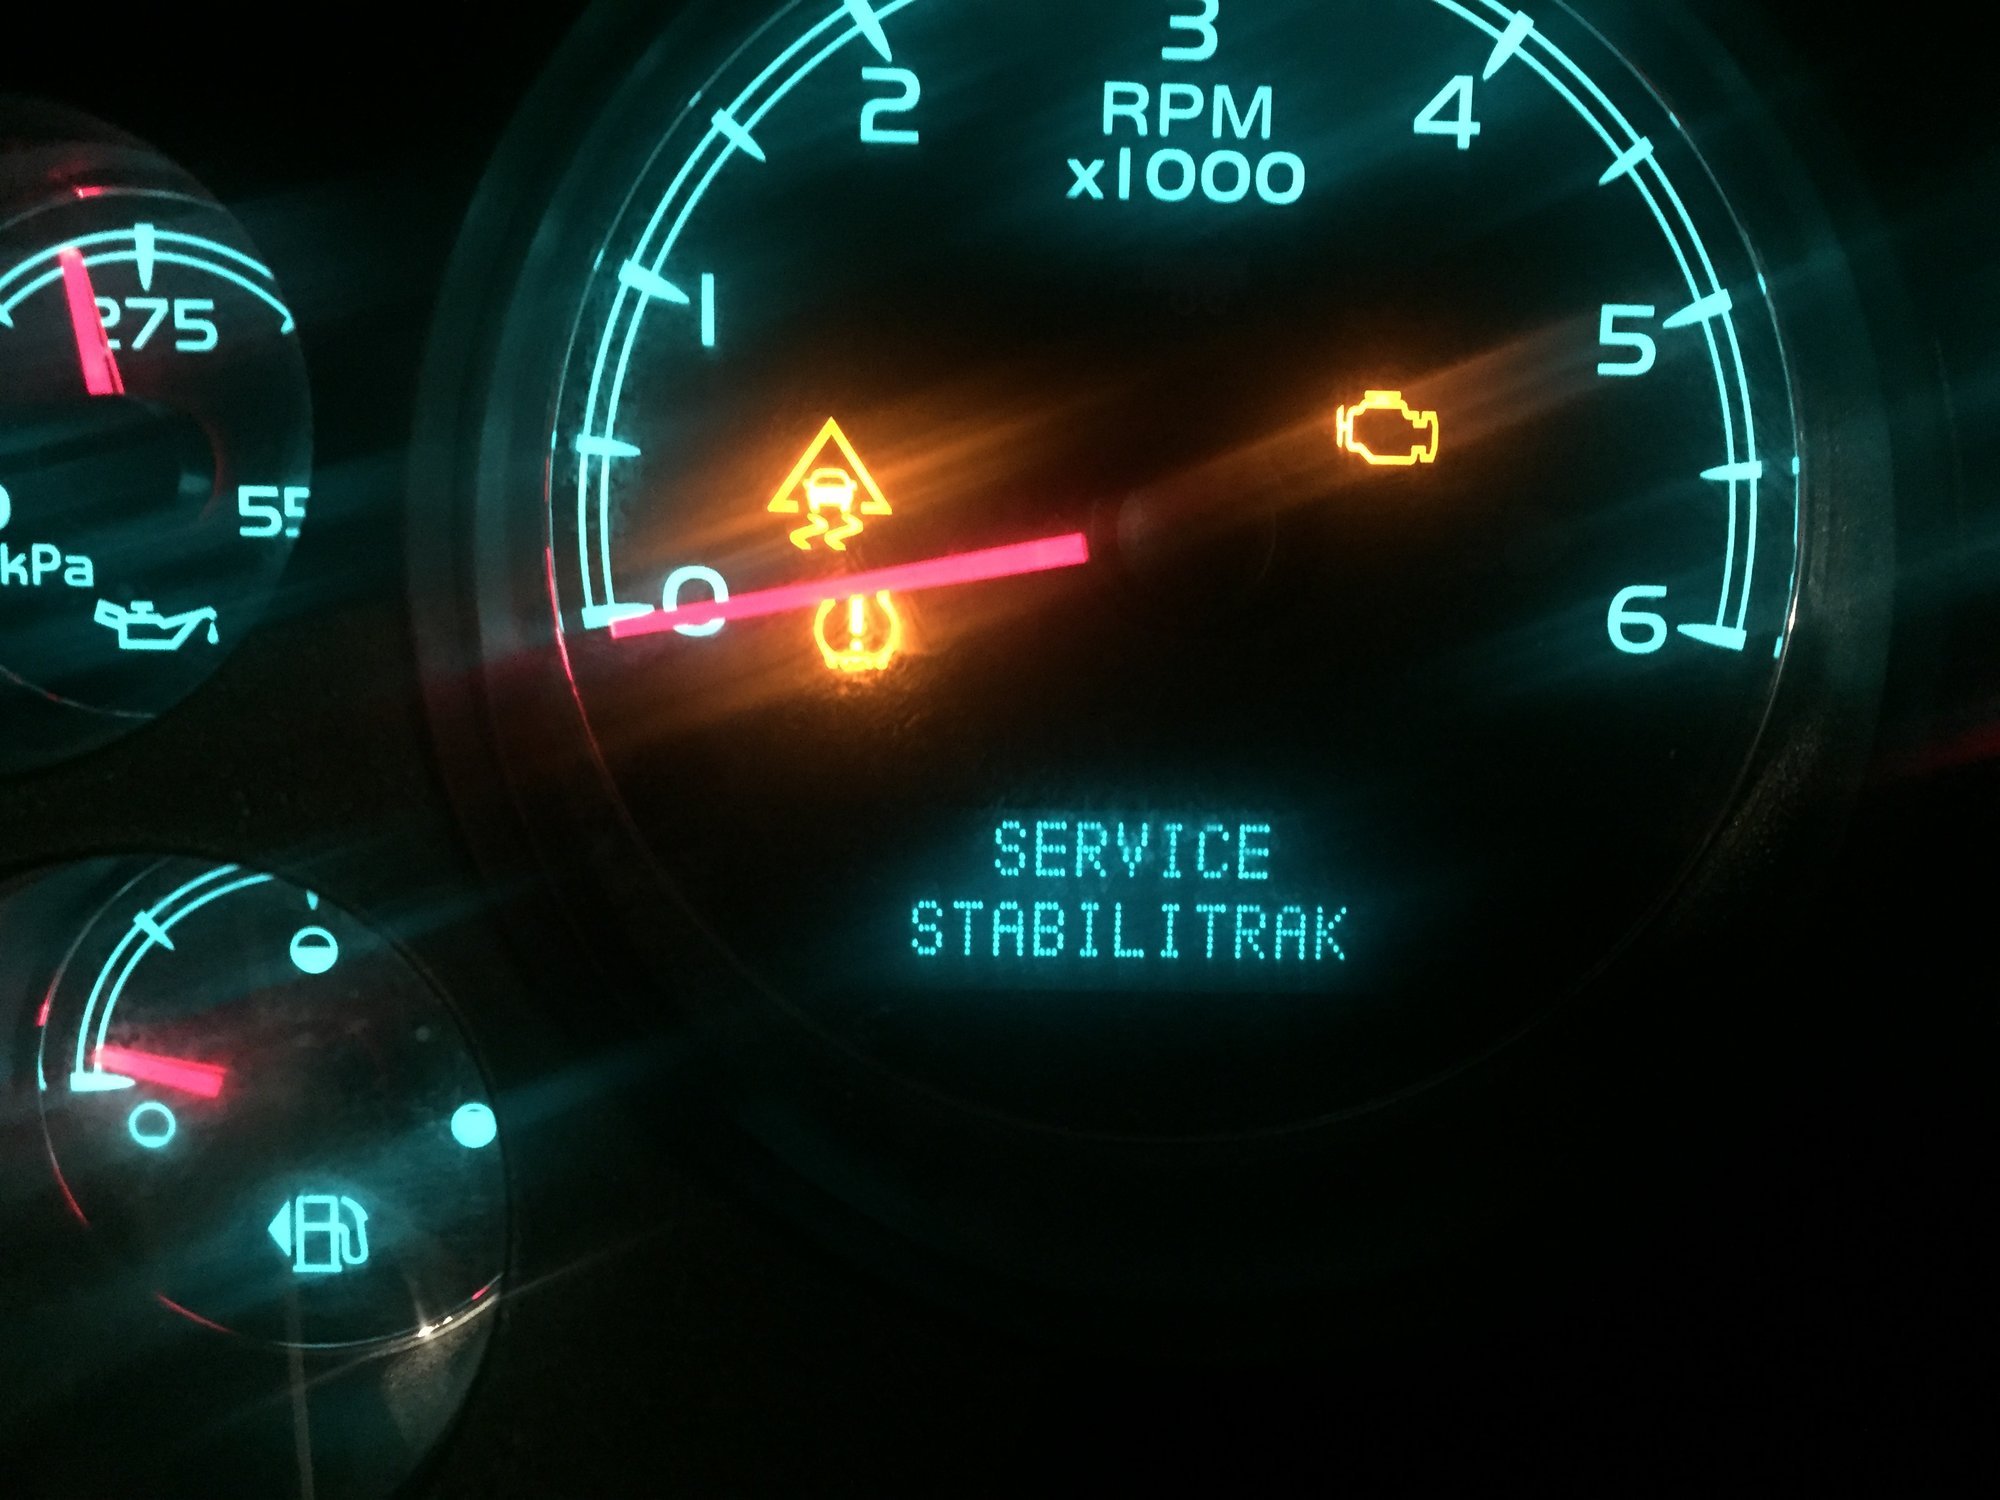 How to Quickly Reset Service Stabilitrak Light on GMC Sierra